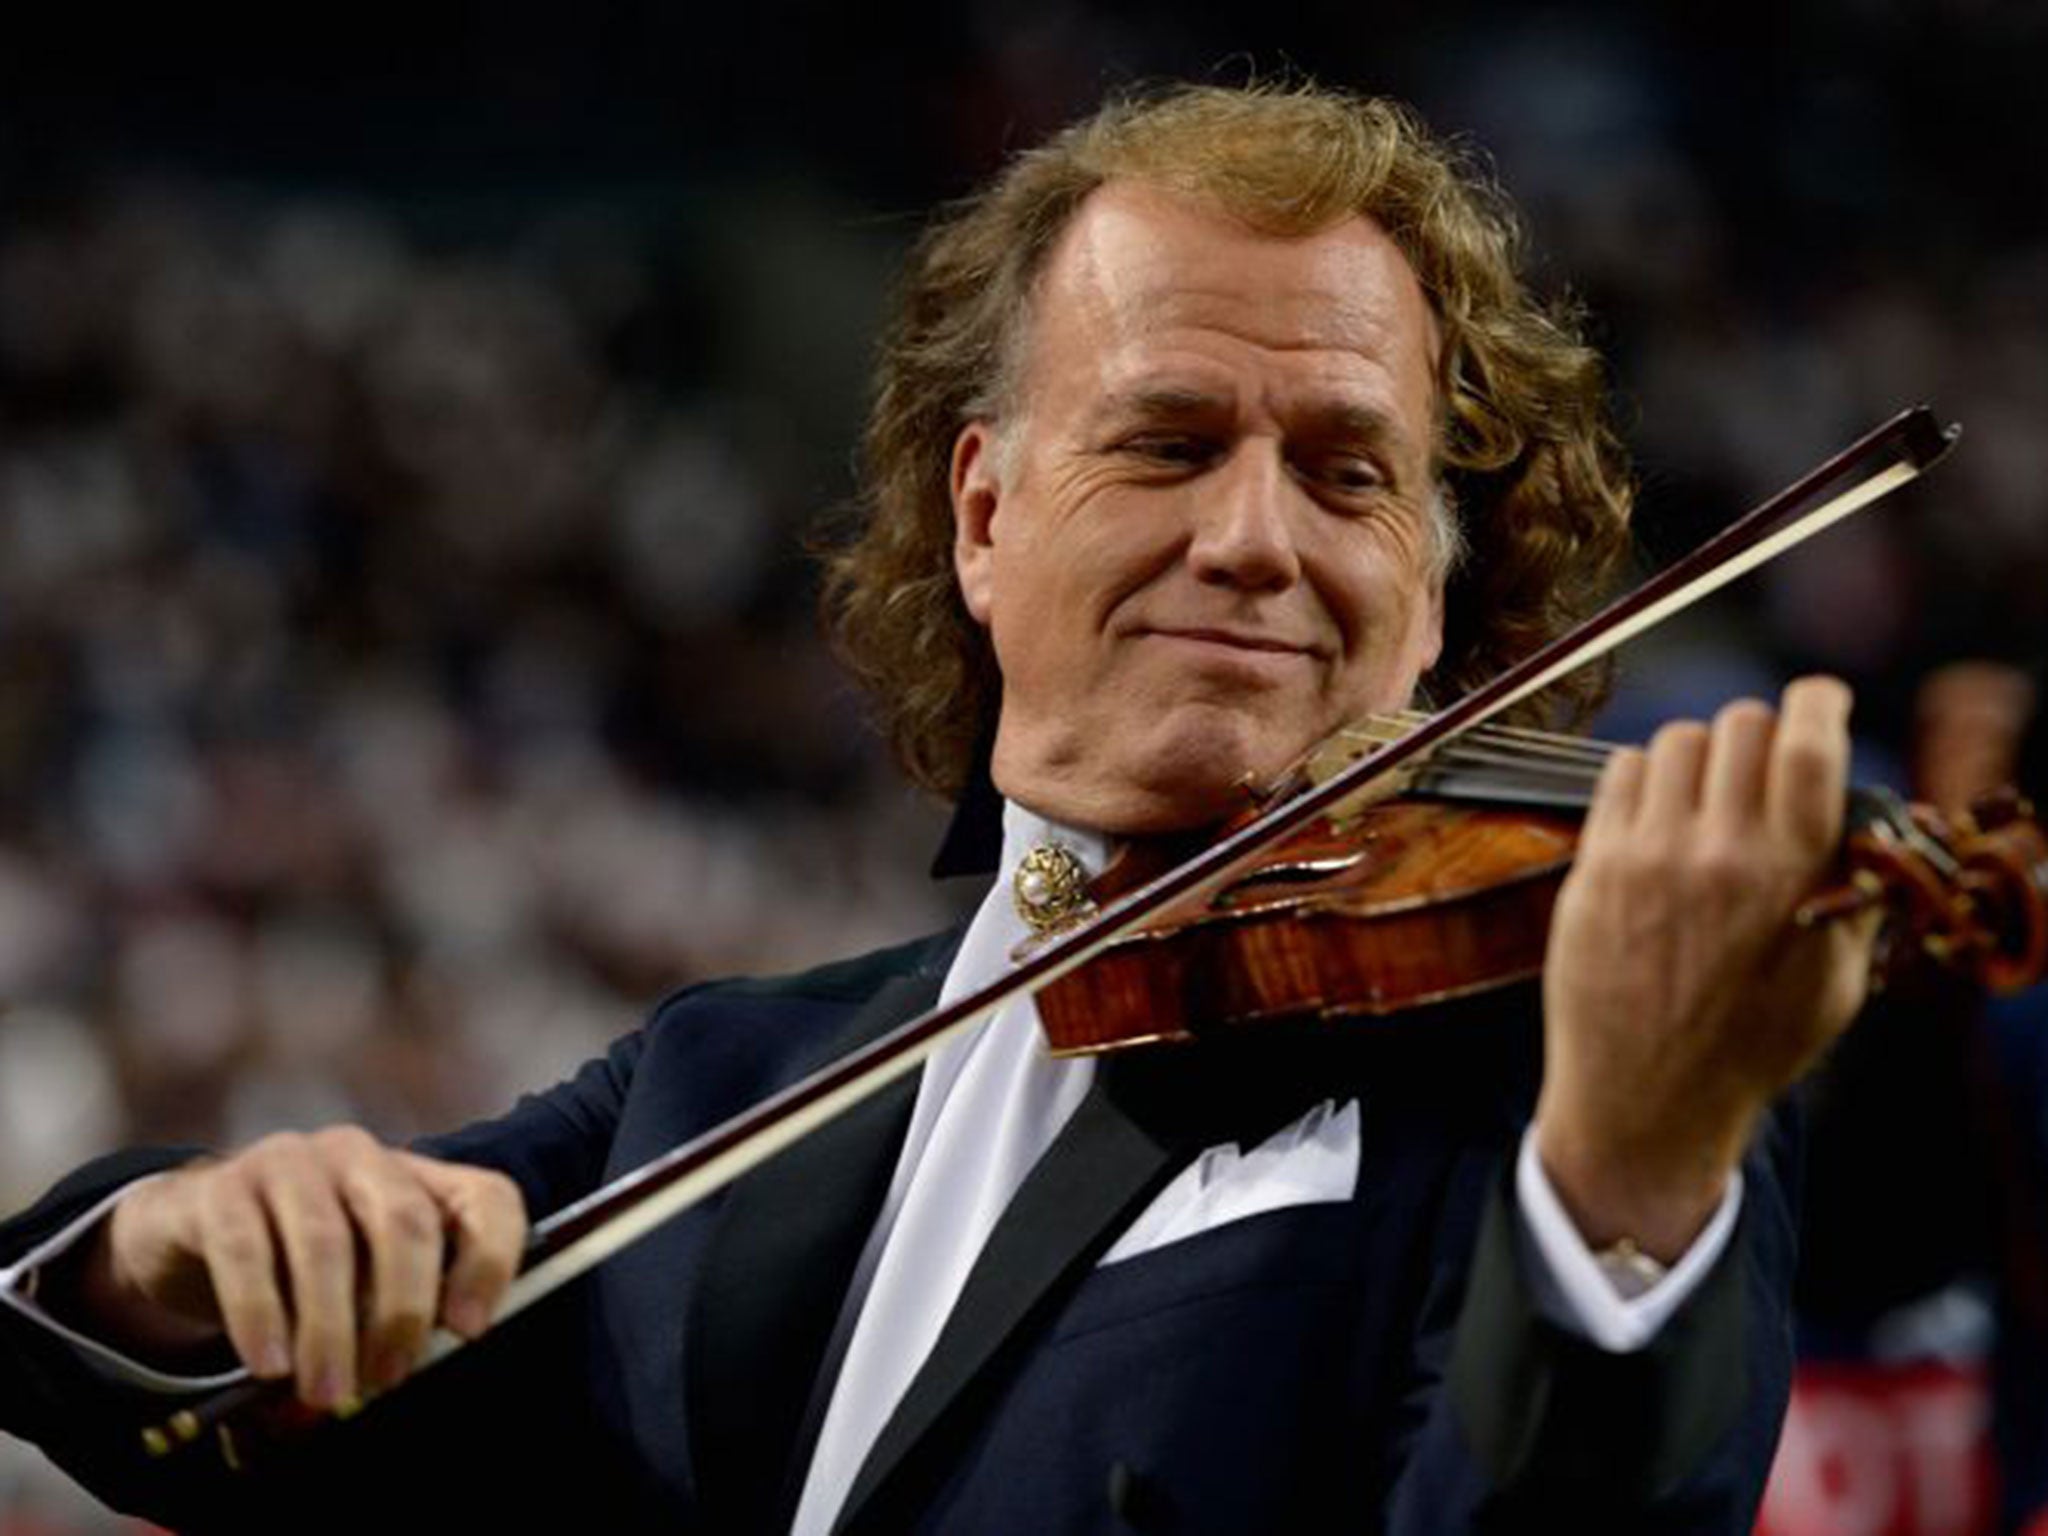 Dutch violinist, conductor and composer Andre Rieu poses for a photograph in Sydney, Australia, 09 October 2013